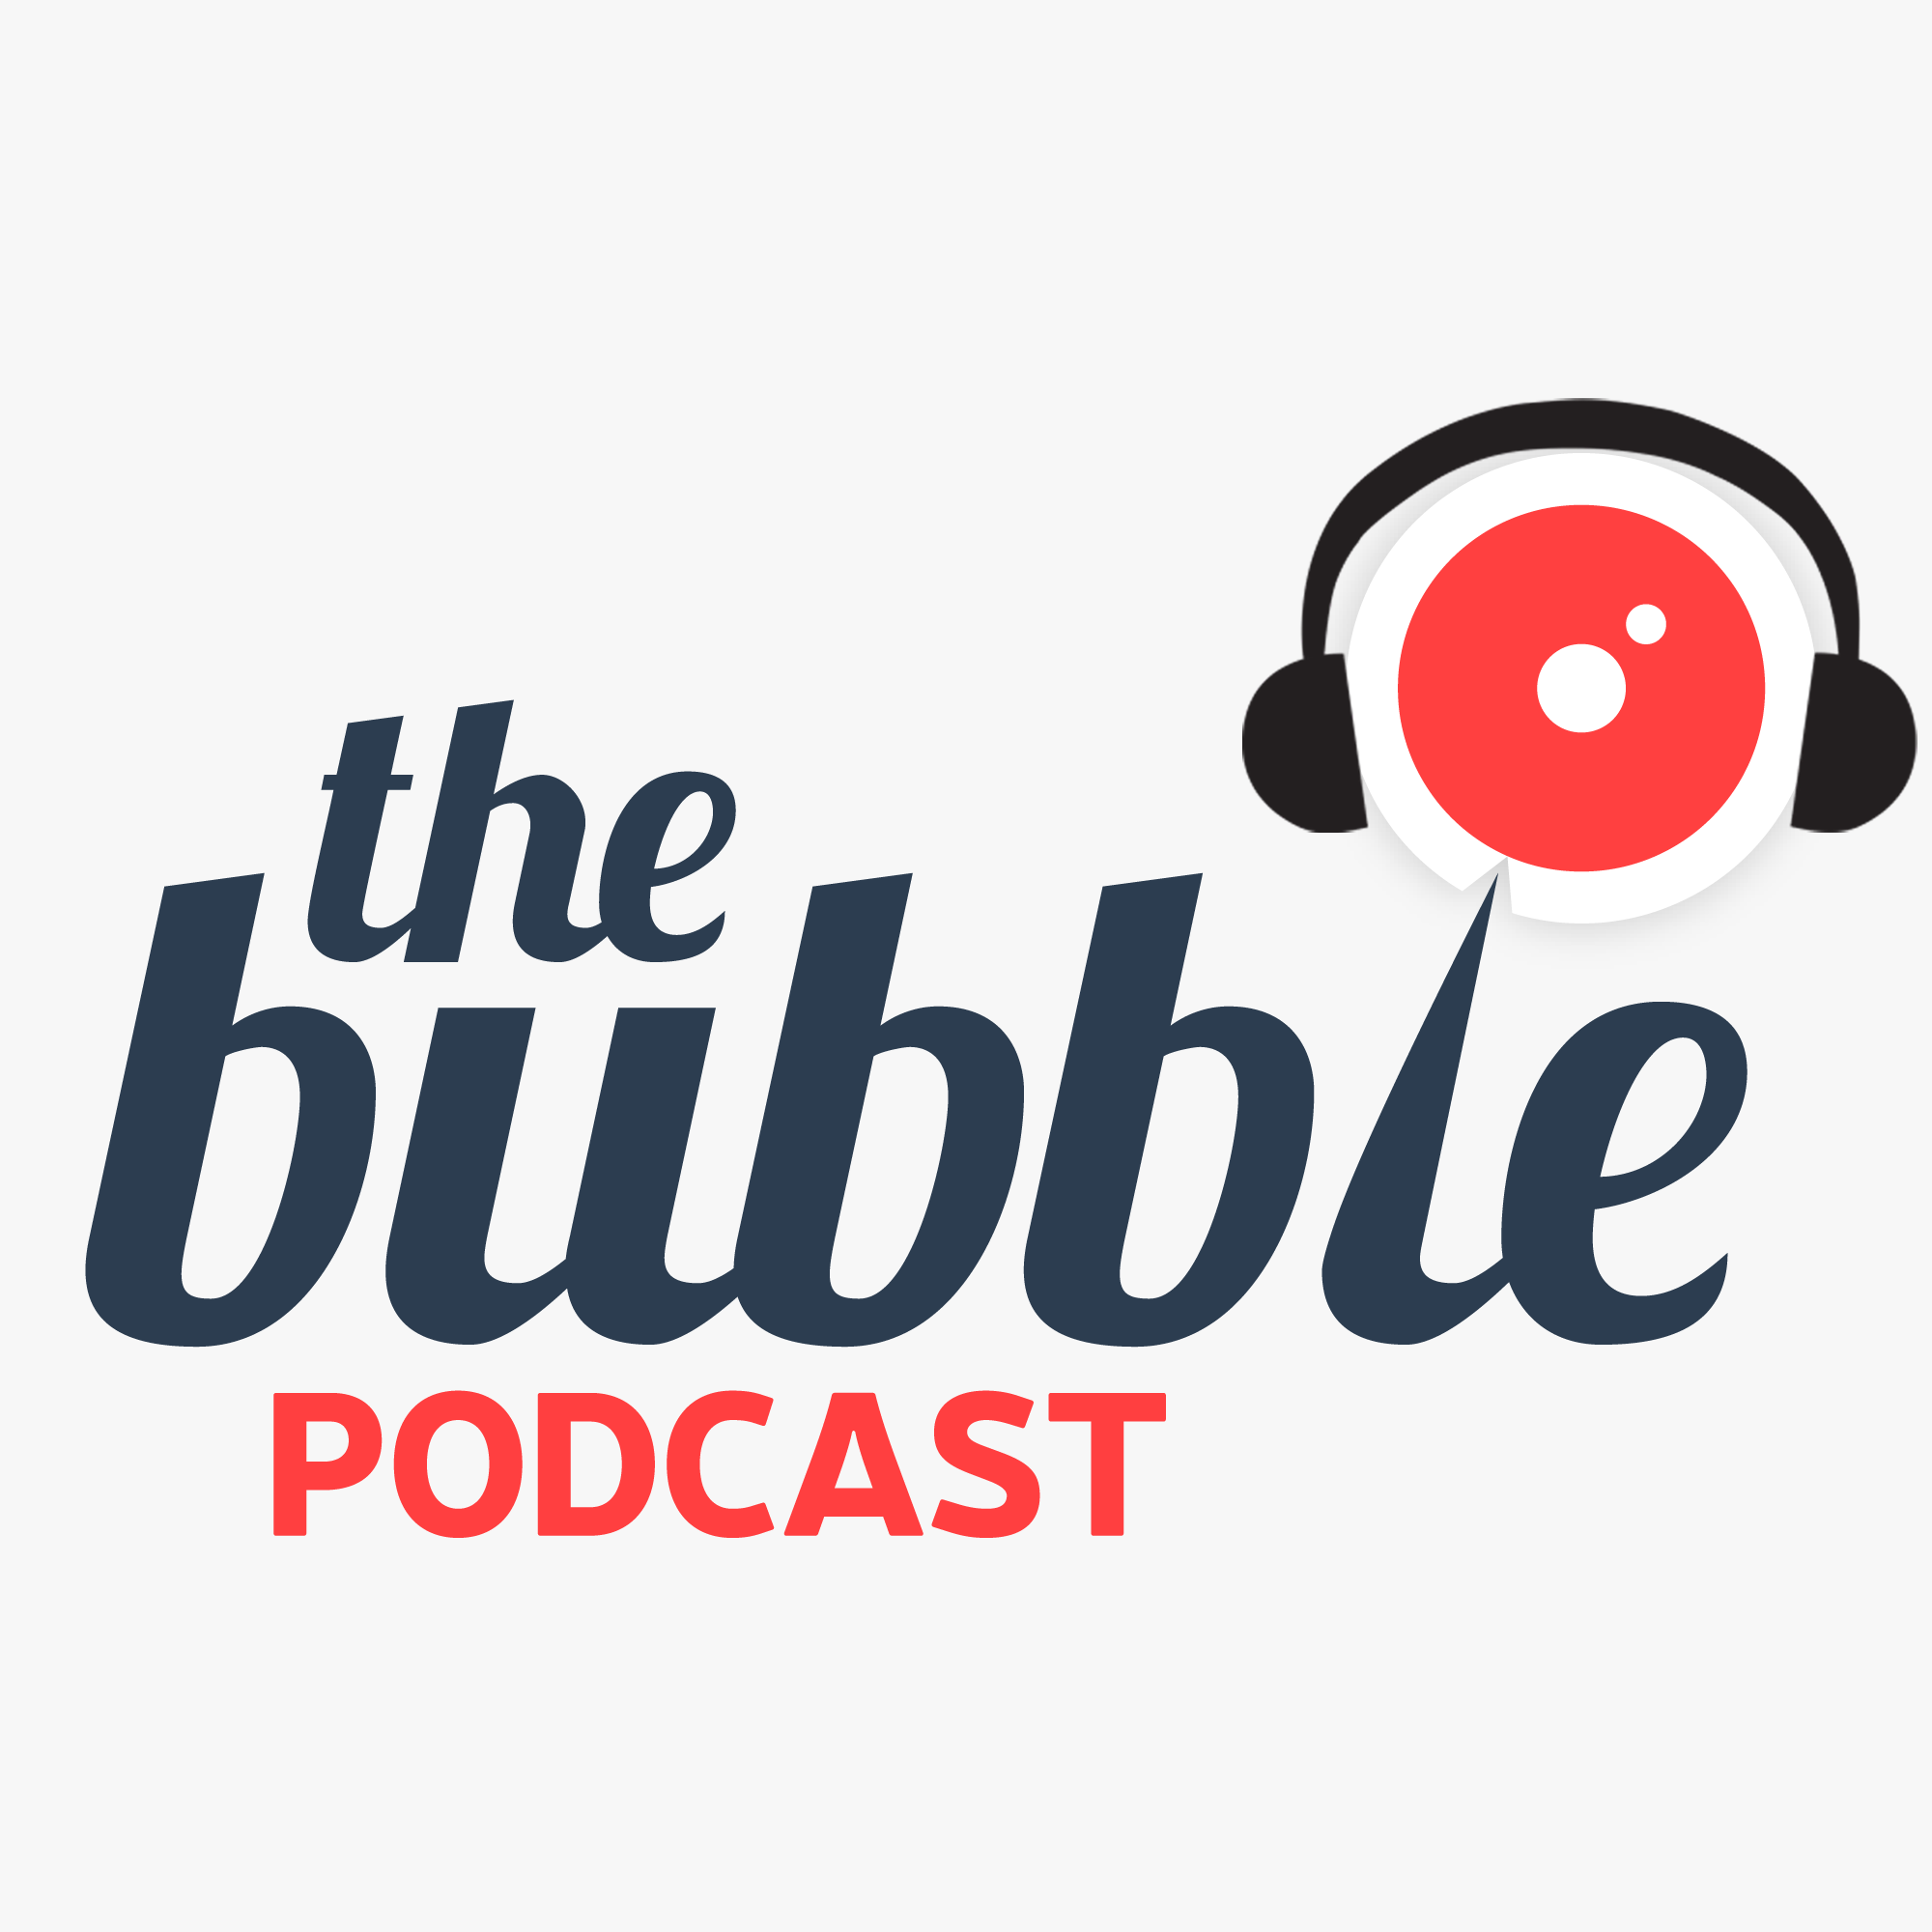 #Podcast The Bubble 26.06: The news. With a twist.